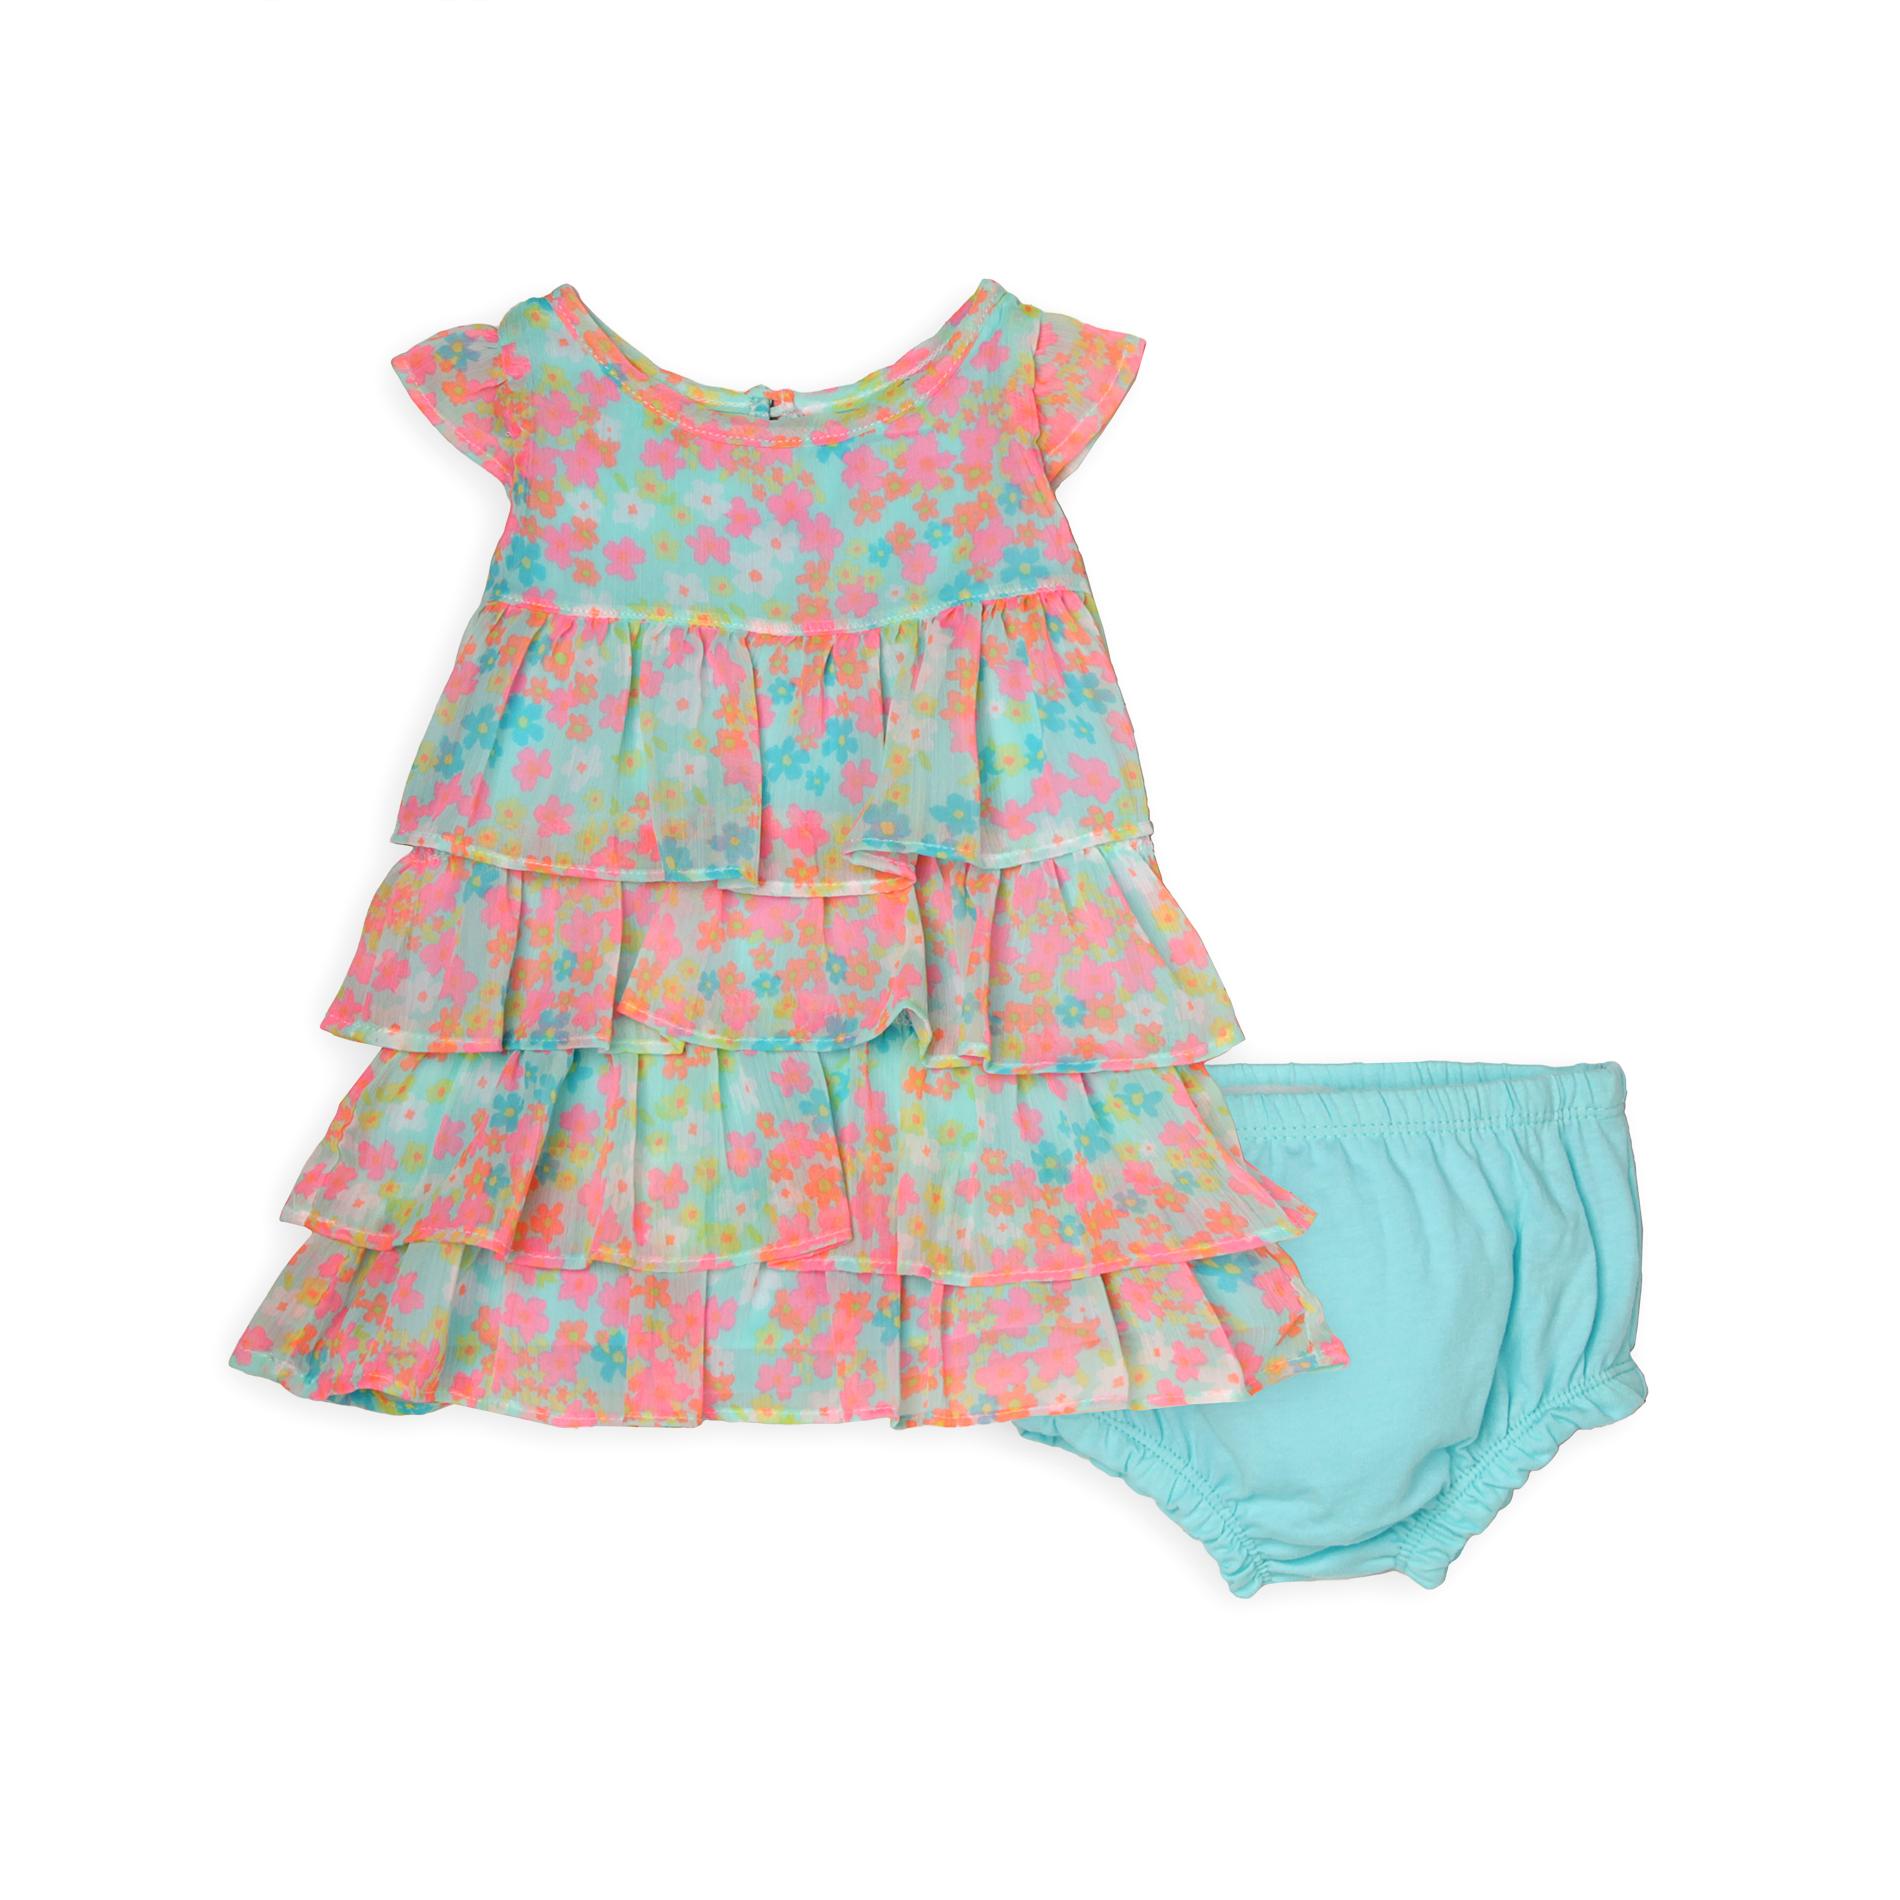 Little Wonders Newborn & Infant Girl's Tiered Chiffon Dress & Diaper Cover - Floral